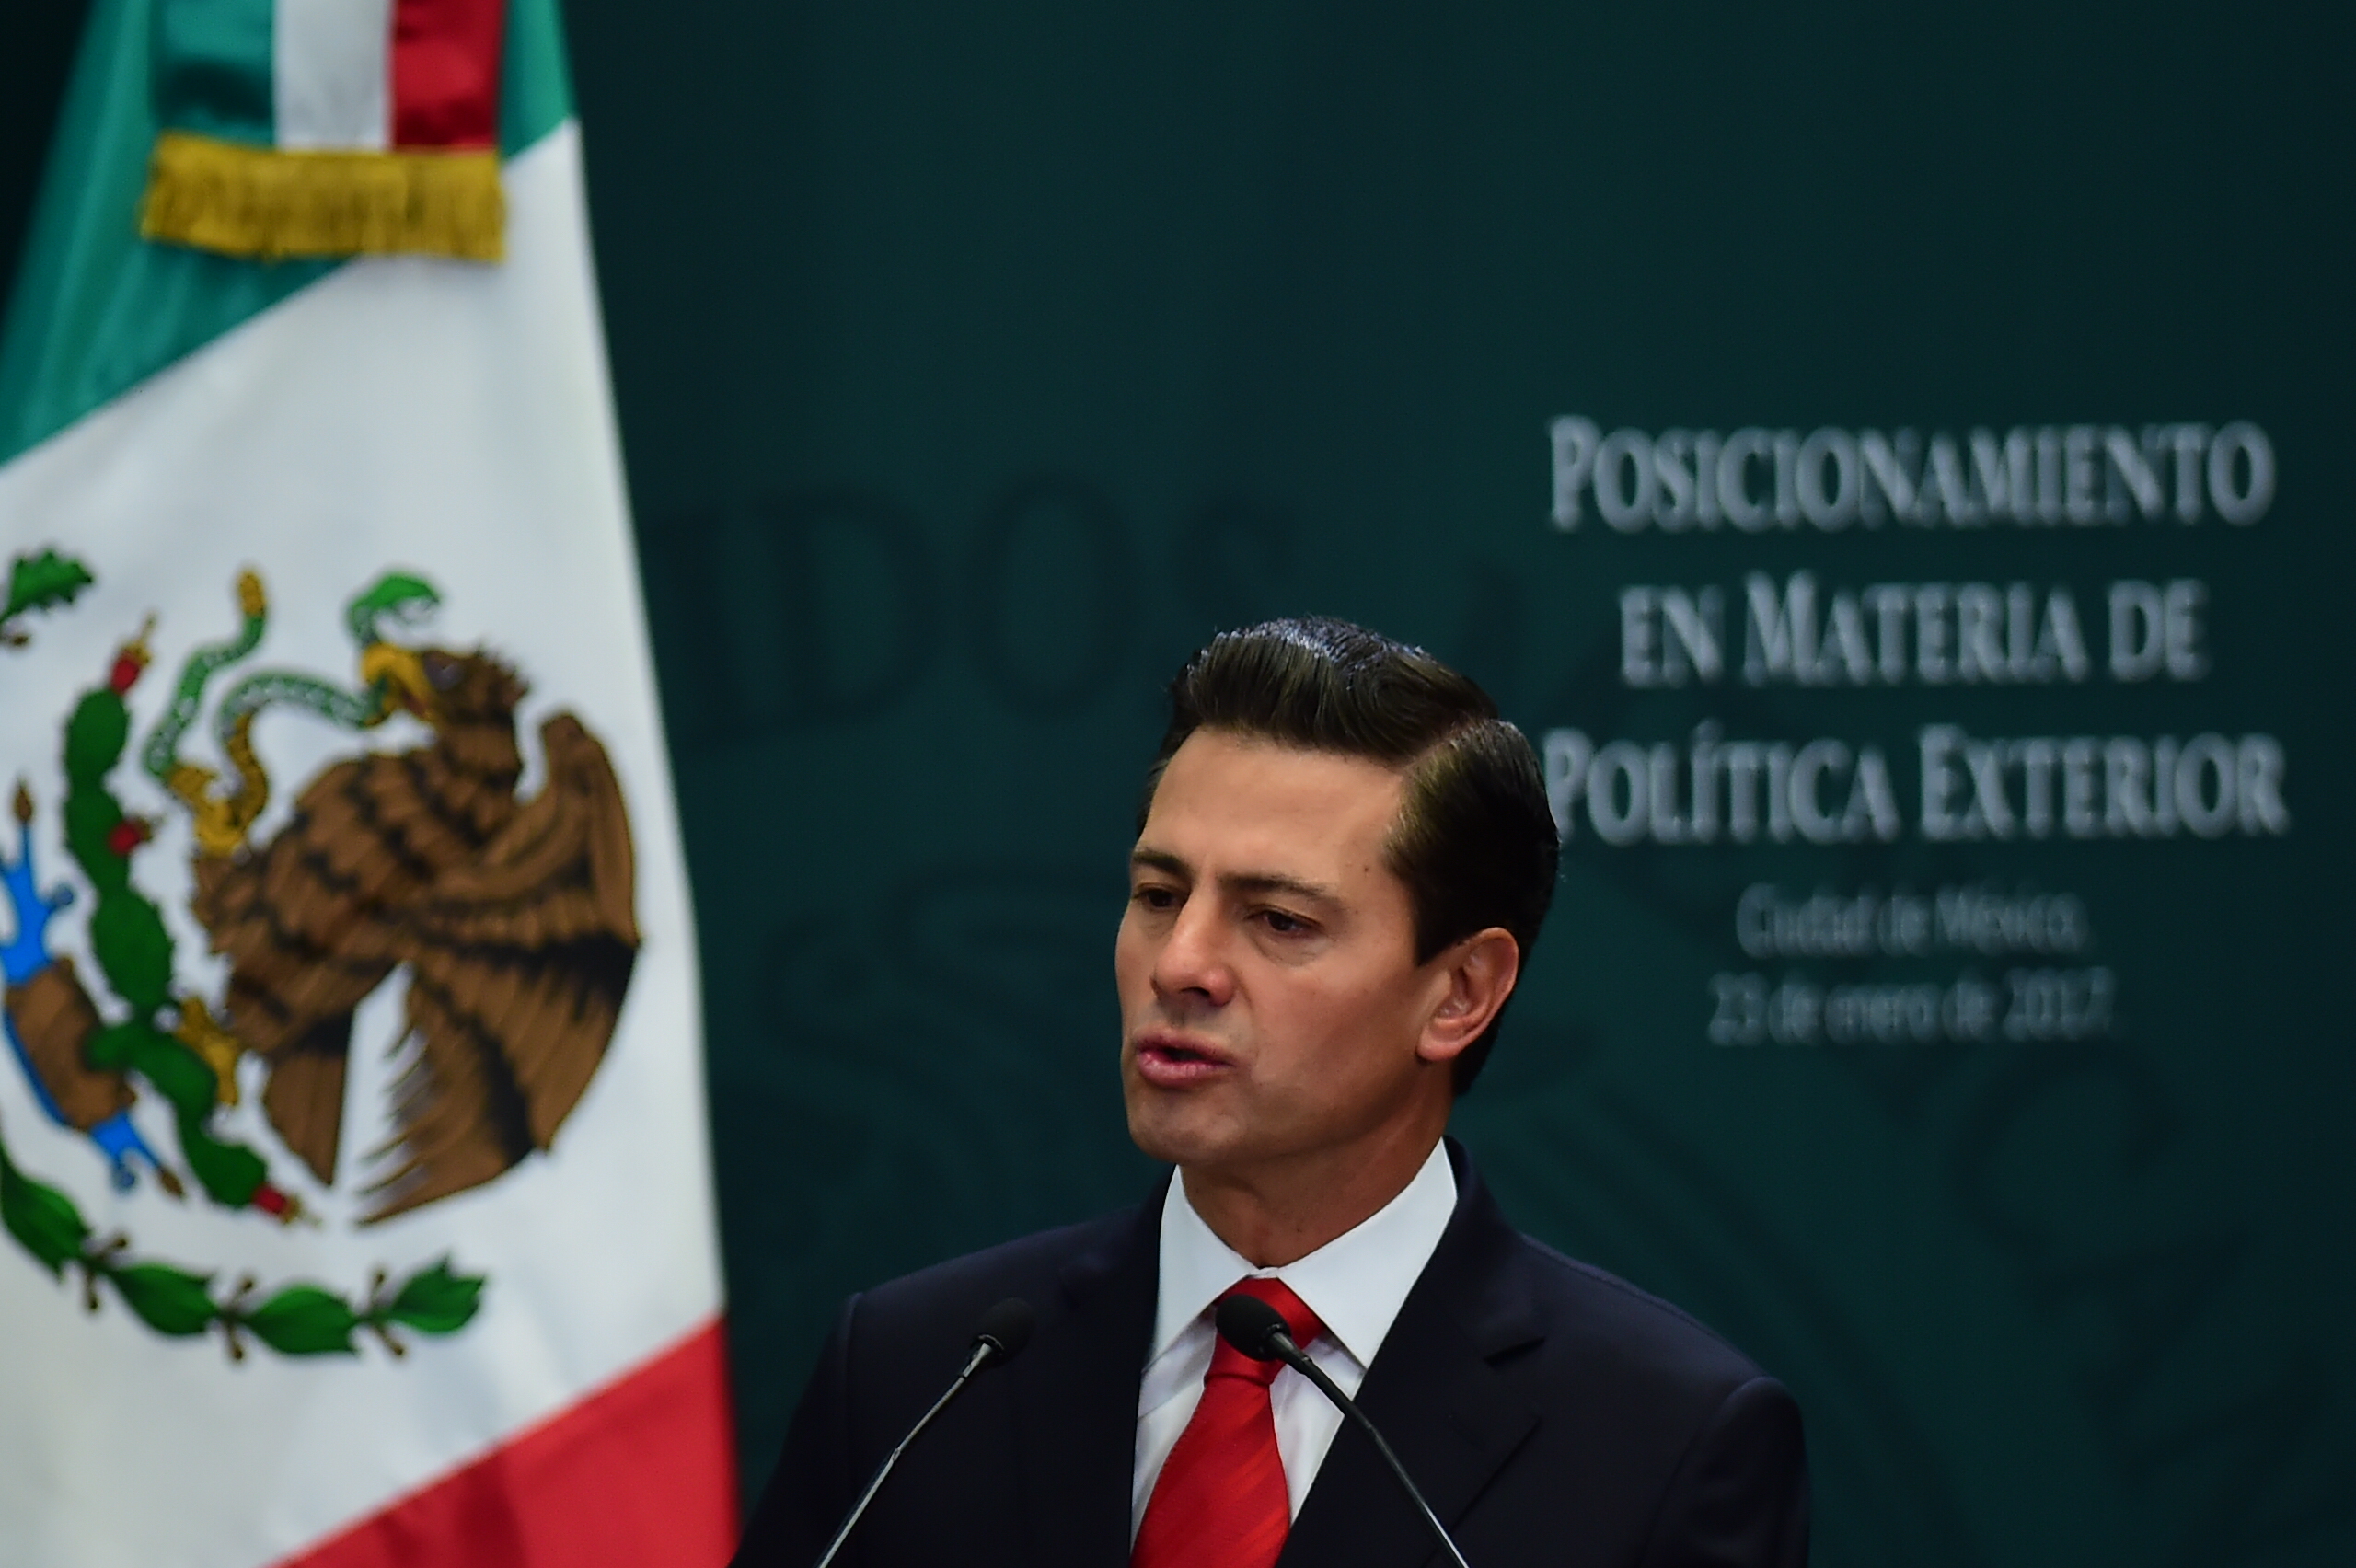 Mexican President Enrique Pena Nieto gives a foreign policy speech after US President Donald Trump vowed to start renegotiating North American trade ties, in Mexico City on January 23, 2017. Trump's vows to scrap the North American Free Trade Agreement to protect US jobs have raised concern in Mexico, which sends most of its exports to the United States. Pena Nieto's office said he congratulated Trump on taking office in a phone call Saturday and that both had agreed to open a "new dialogue." / AFP PHOTO / Ronaldo SCHEMIDT